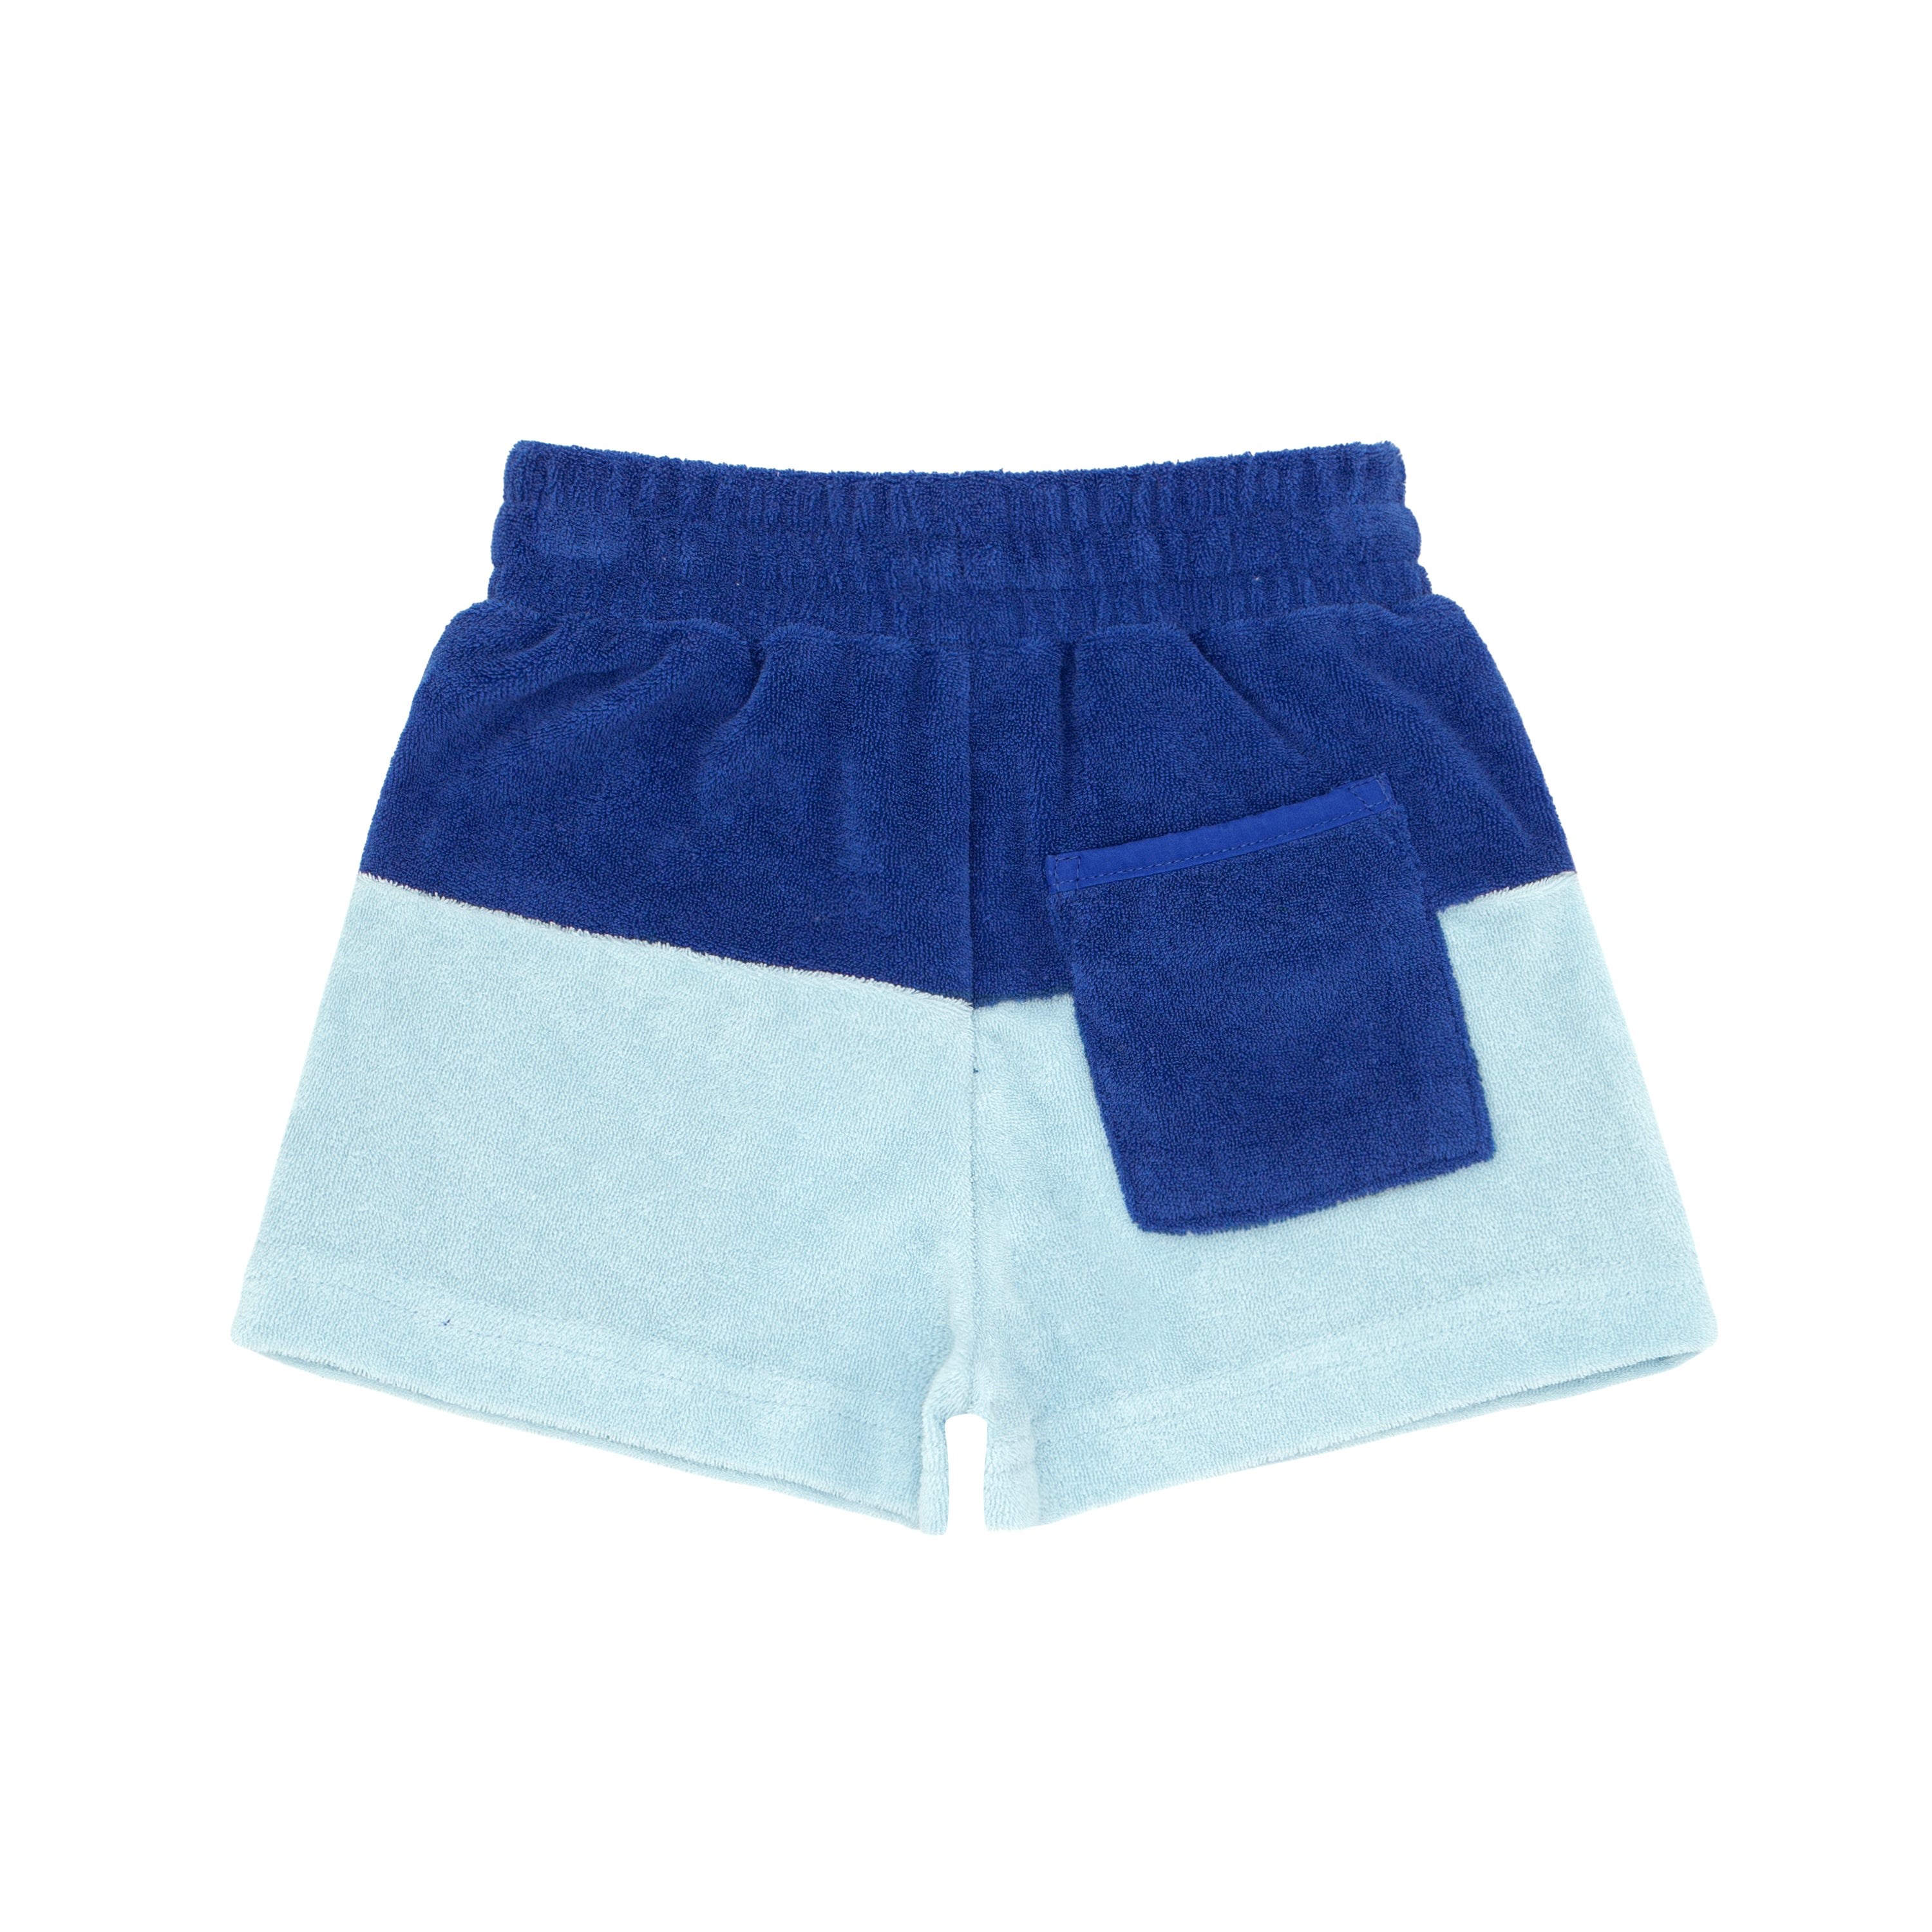 Boys Pacific and Cove Blue Colorblock French Terry Short